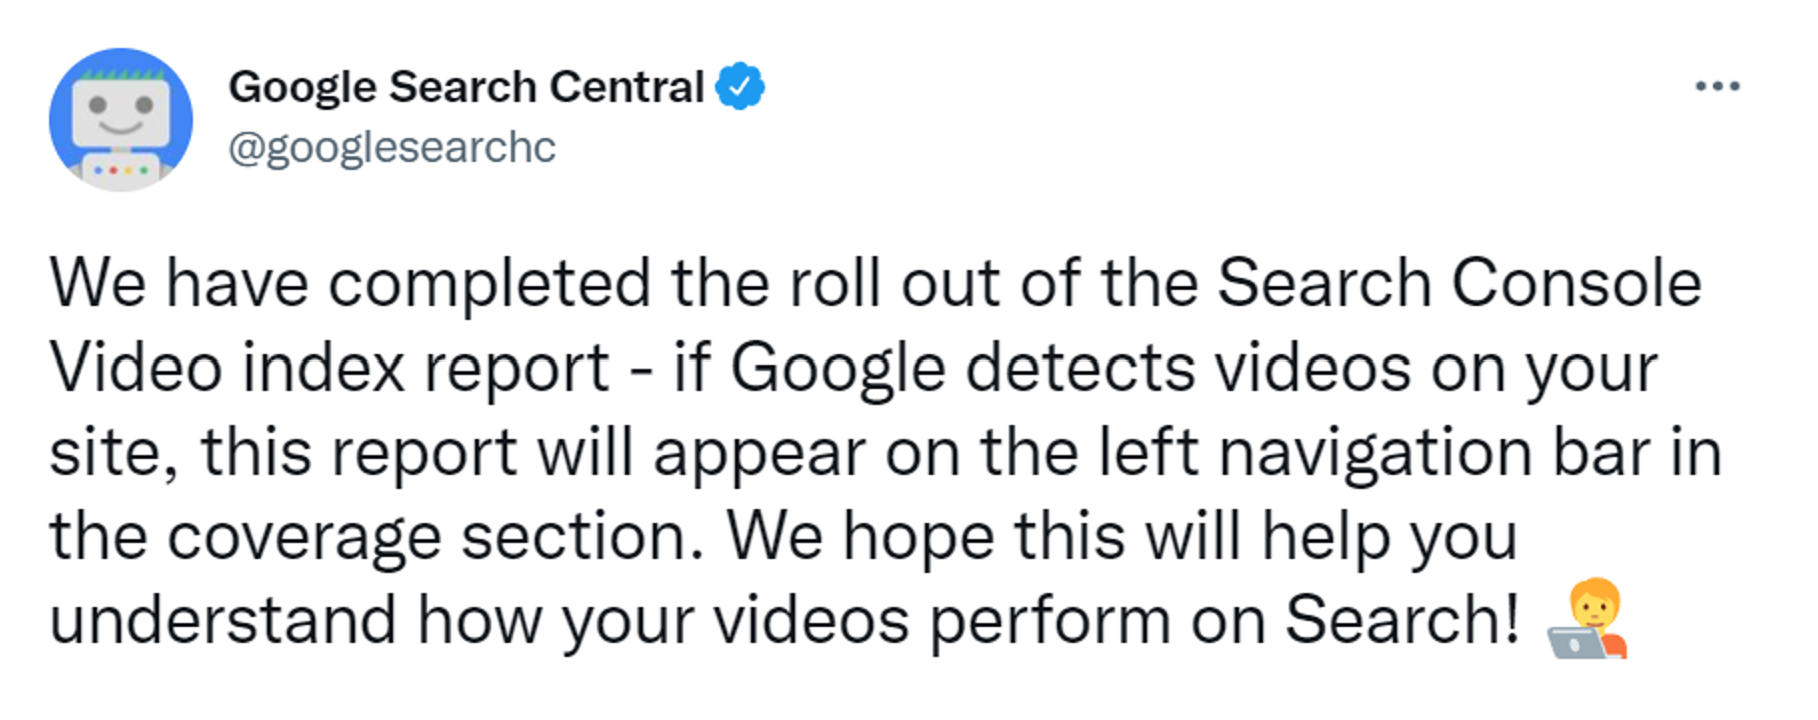 1. Google’s Twitter announcement about its new GSC Video Indexing Report